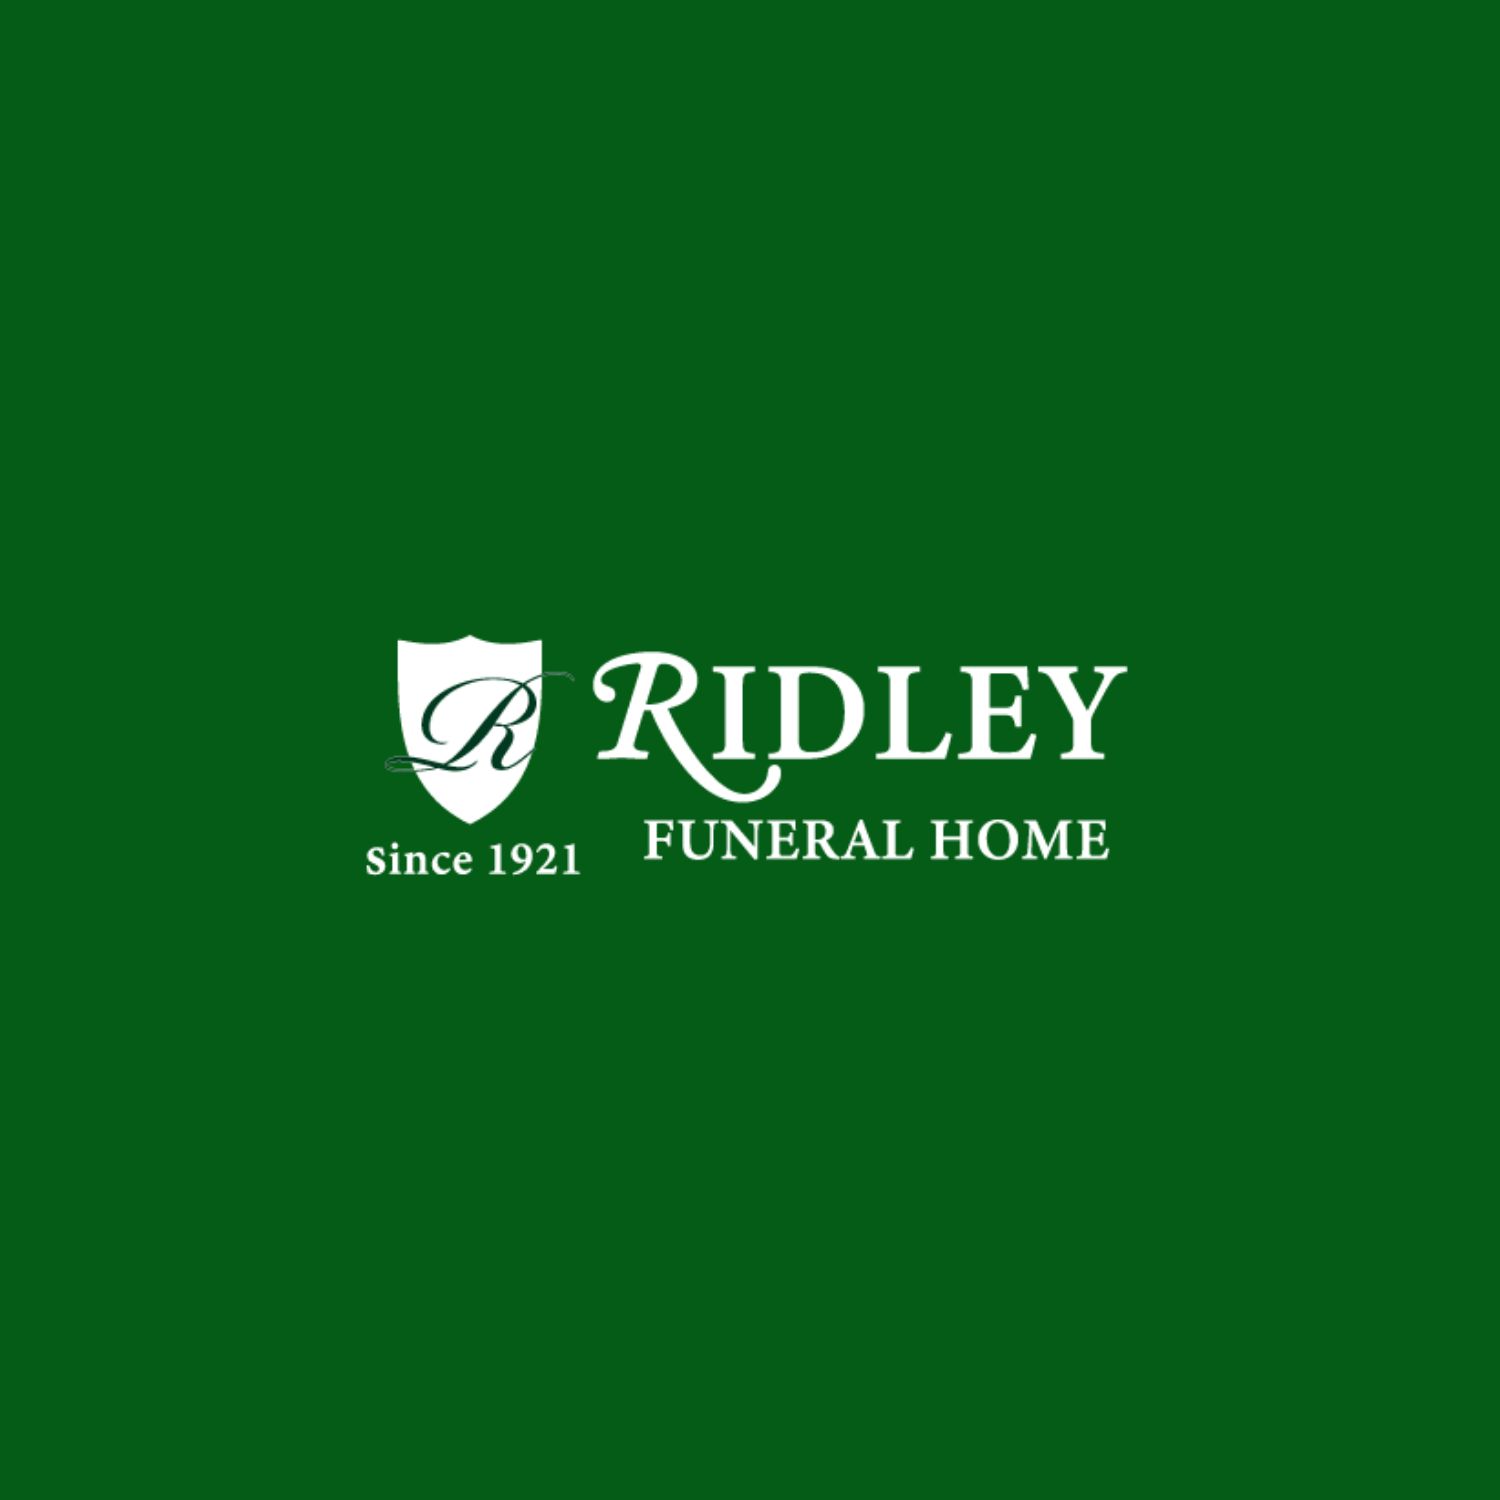 Ridley Funeral Home Life's Undertakings